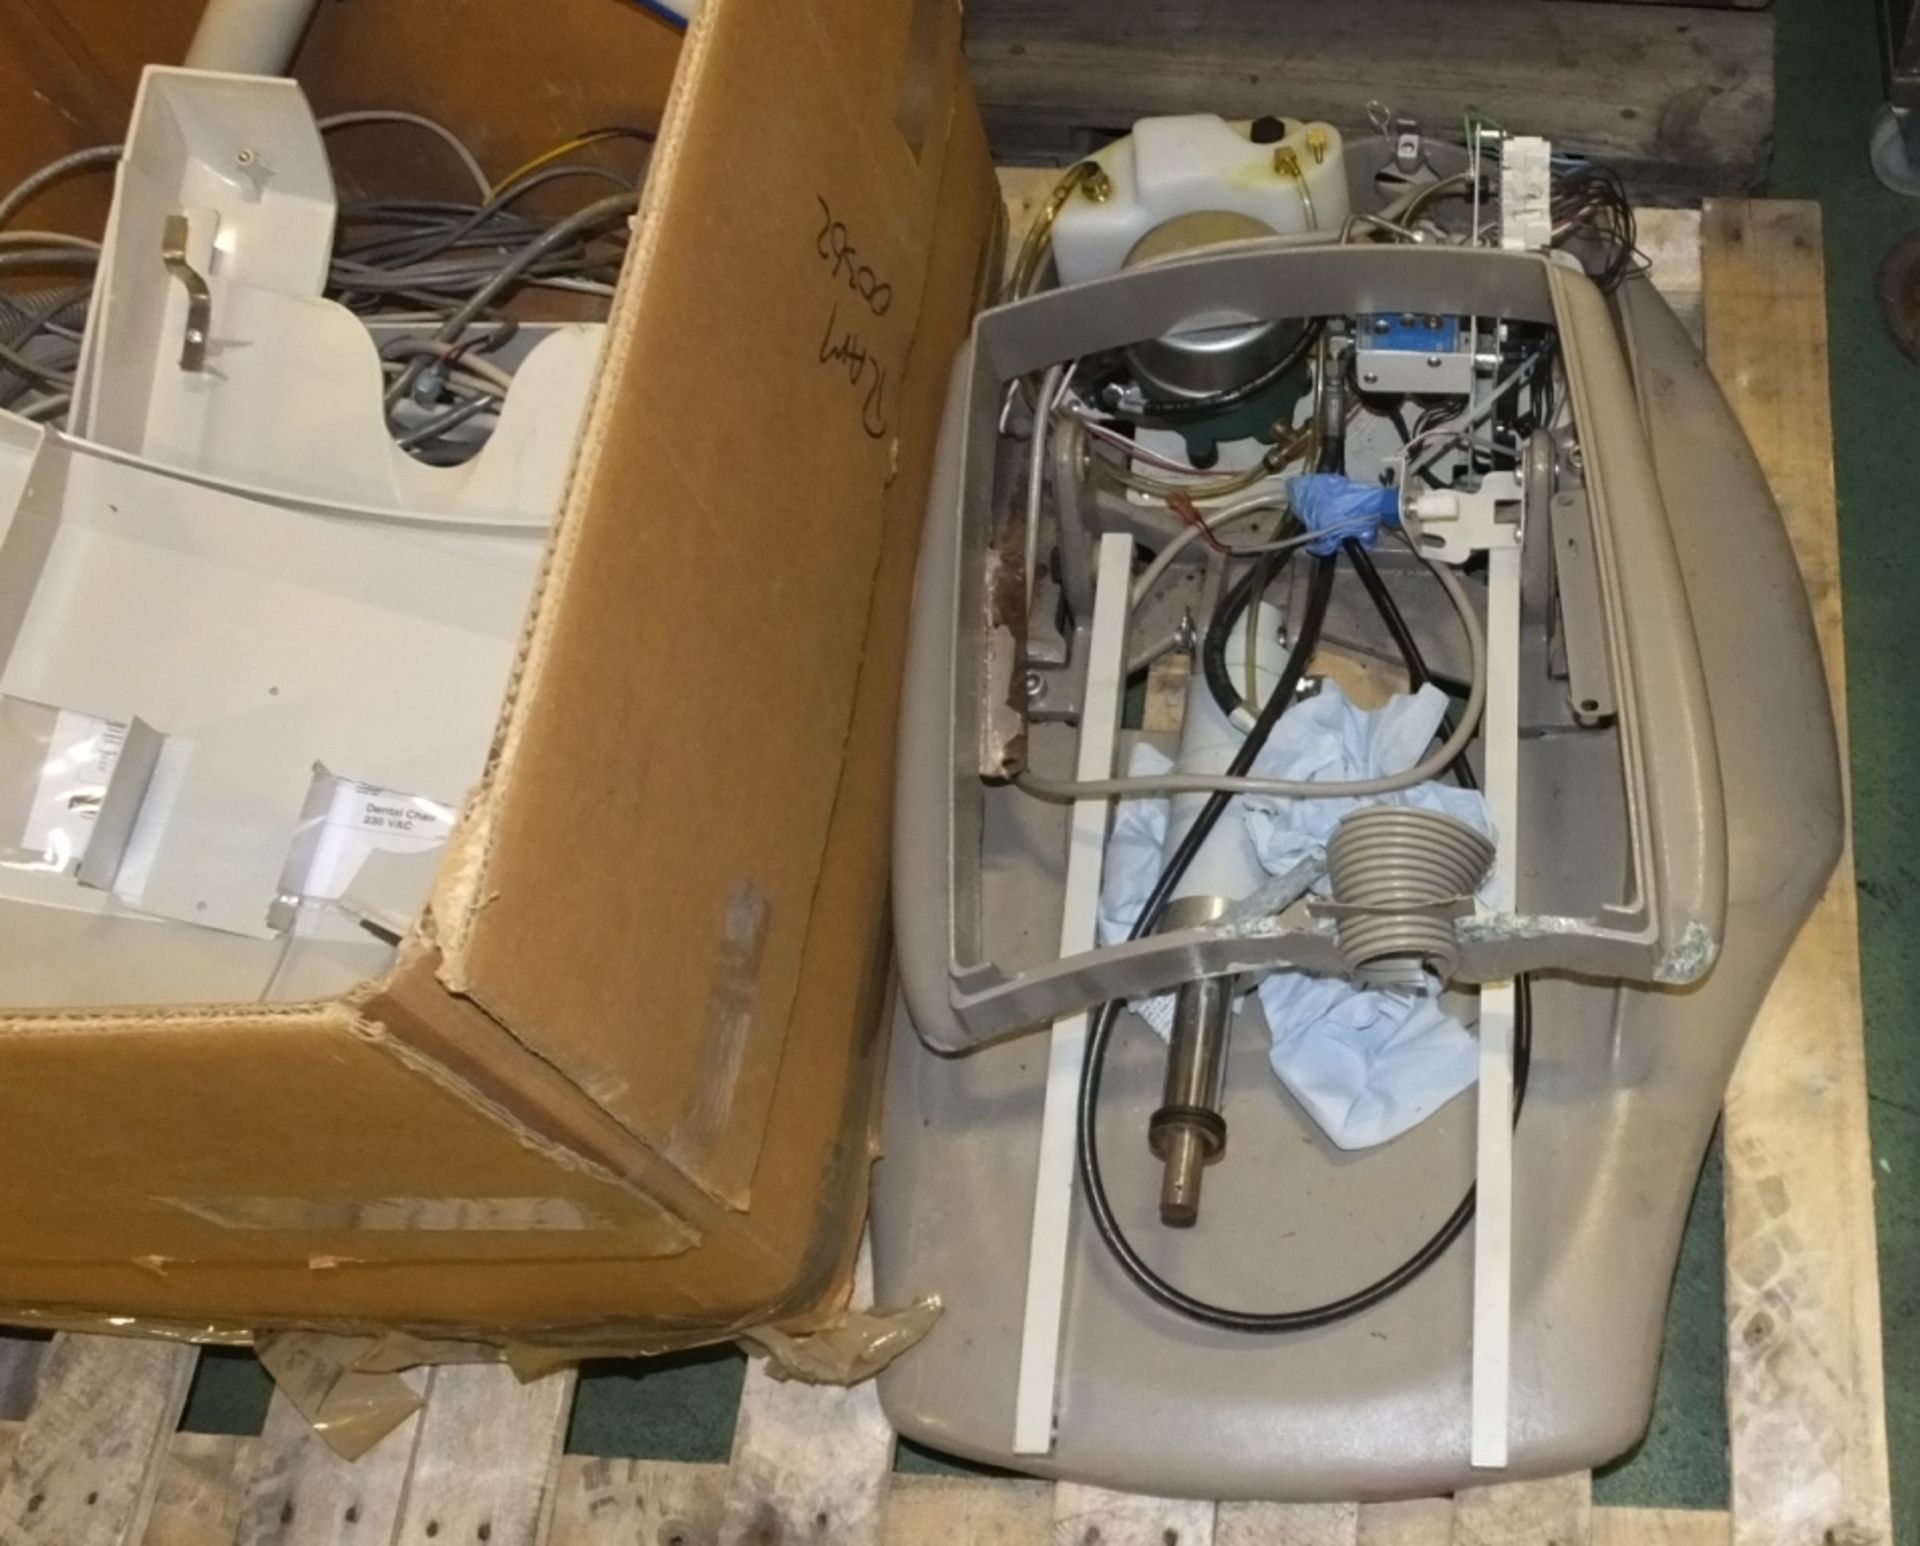 Midmark Dental Operating Chair - disassembled - 2 pallets - Image 4 of 5